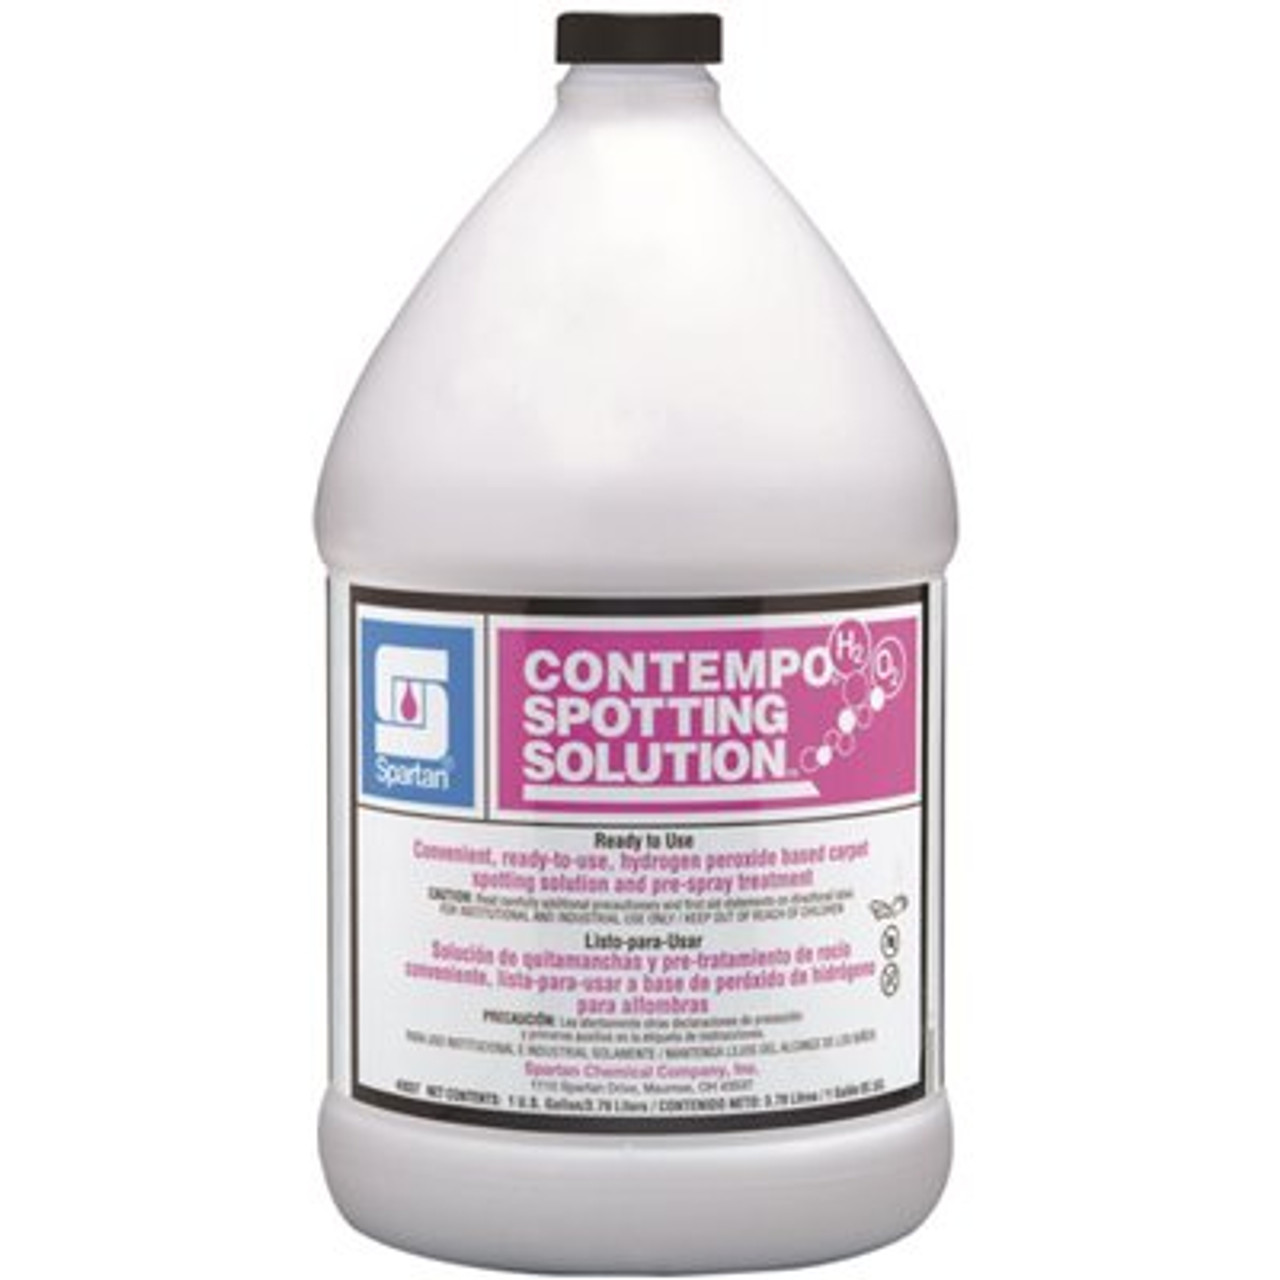 Spartan Chemical Co. Contempo H2O2 Spotting Solution 1 Gallon Fresh Crystal Water Scent Carpet Spotter (4 Per Pack)